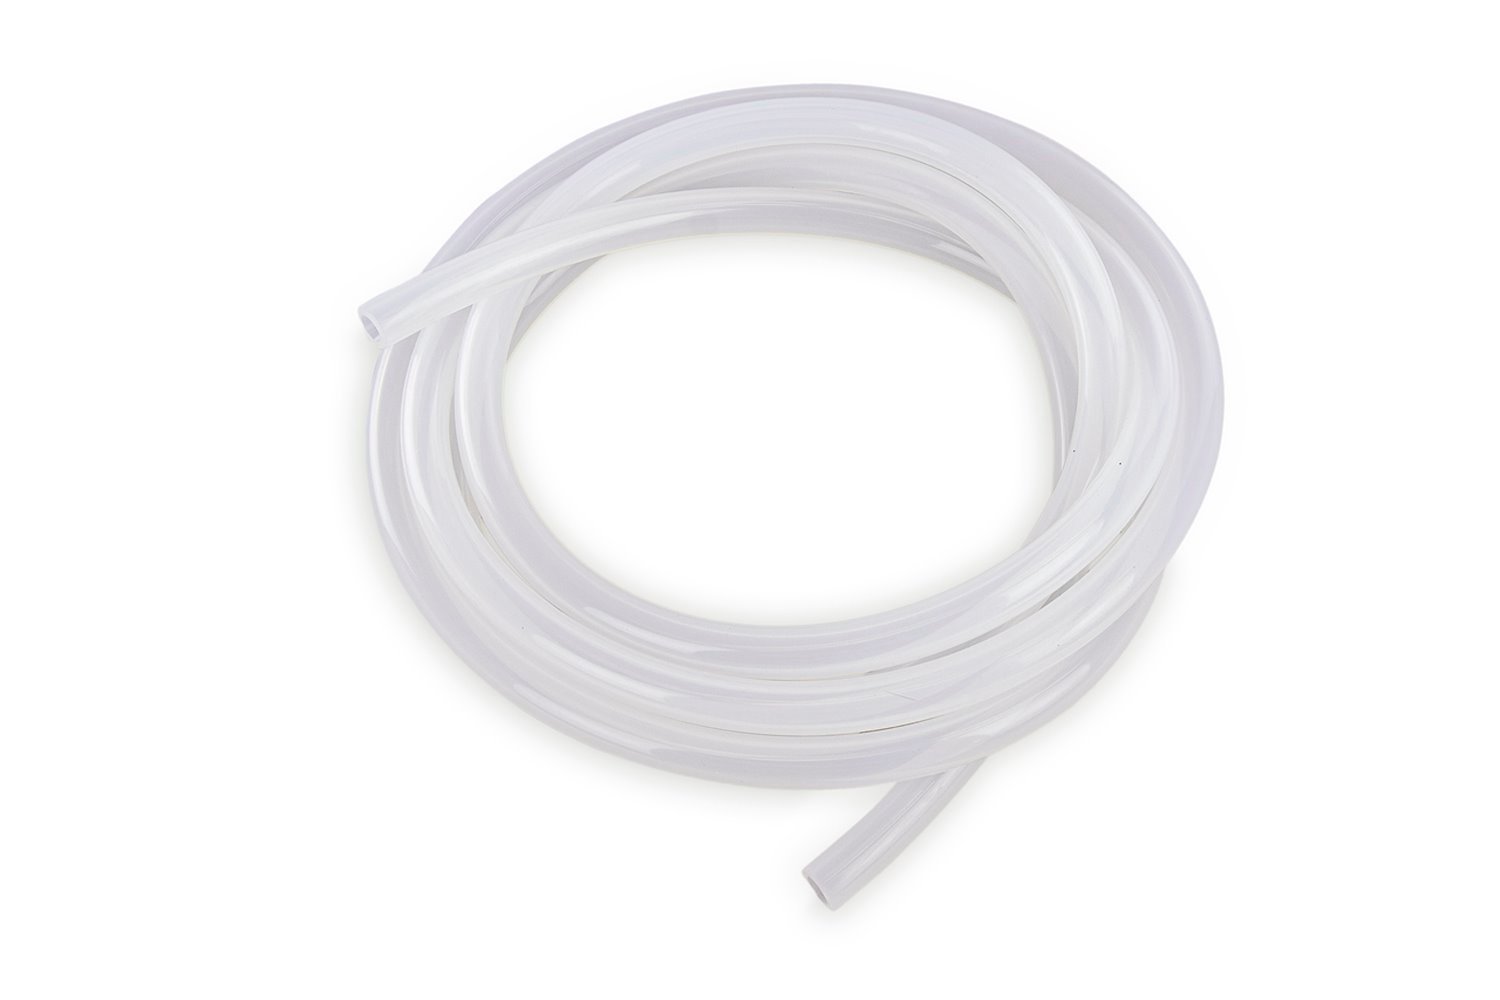 HTSVH4-CLEARx5 High-Temperature Silicone Vacuum Hose Tubing, 5/32 in. ID, 5 ft. Roll, Clear